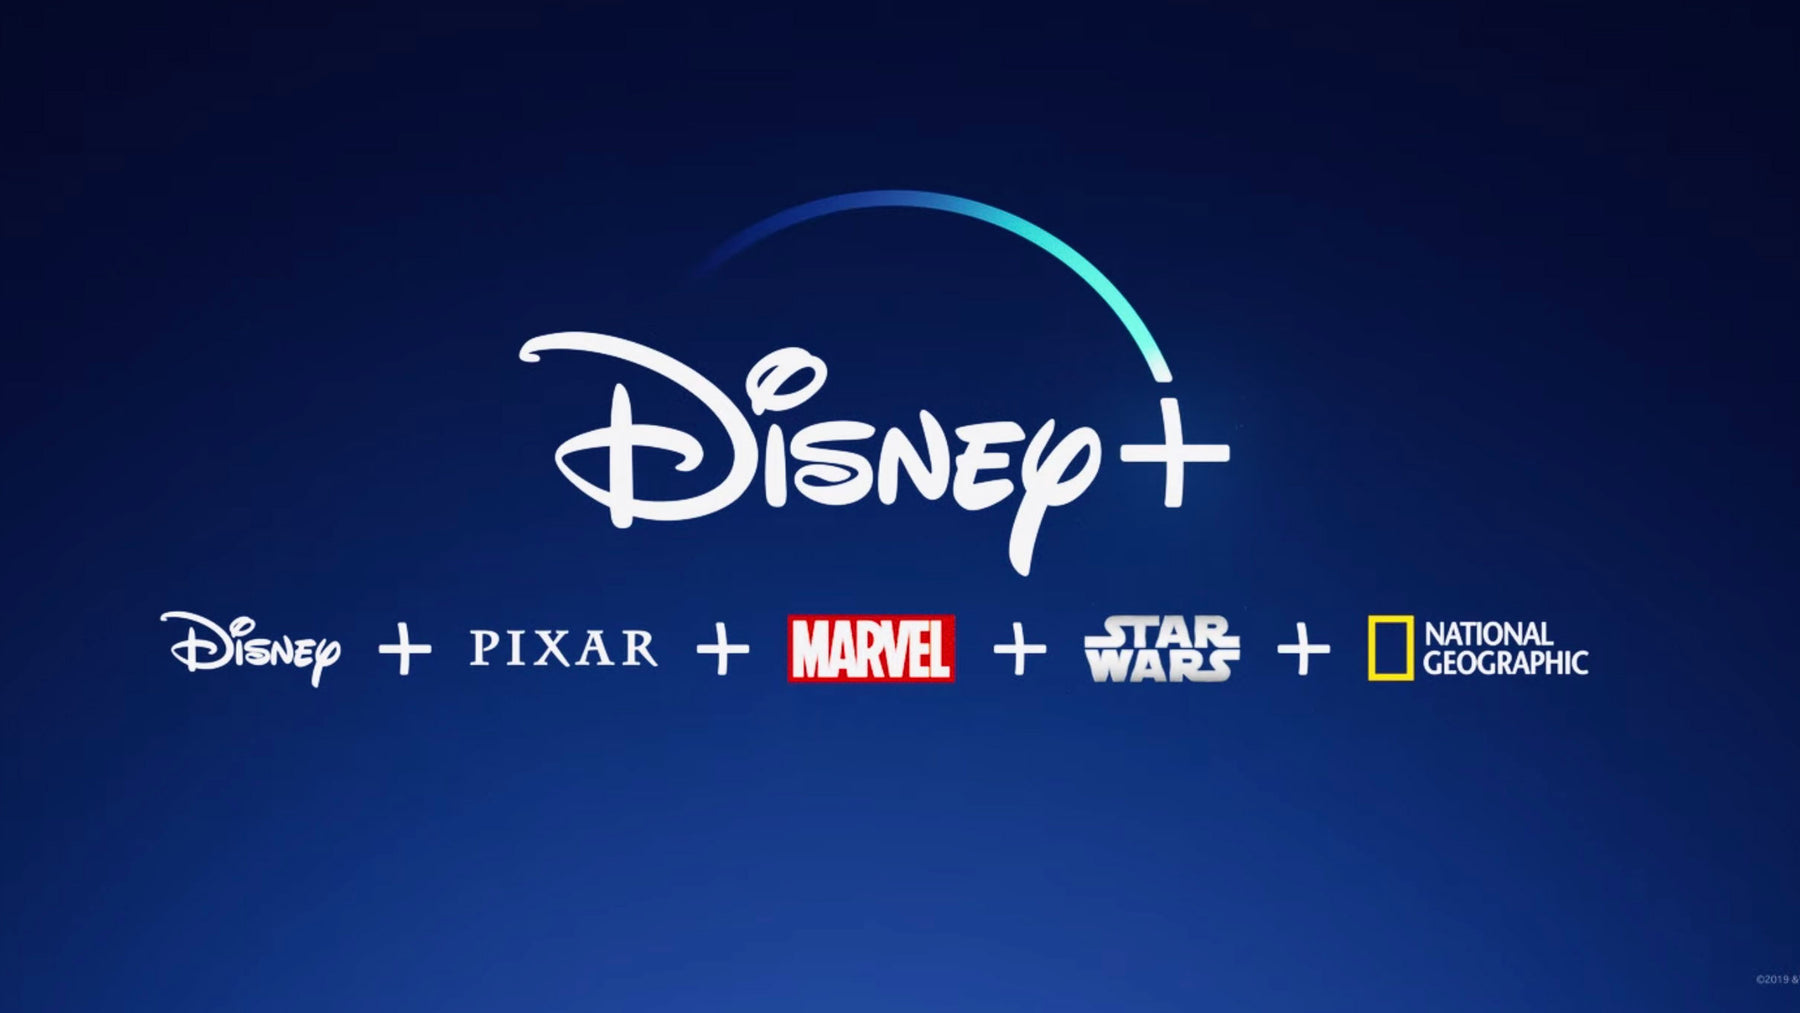 Disney+ is coming to the UK! And here are the best toys to pair it with...